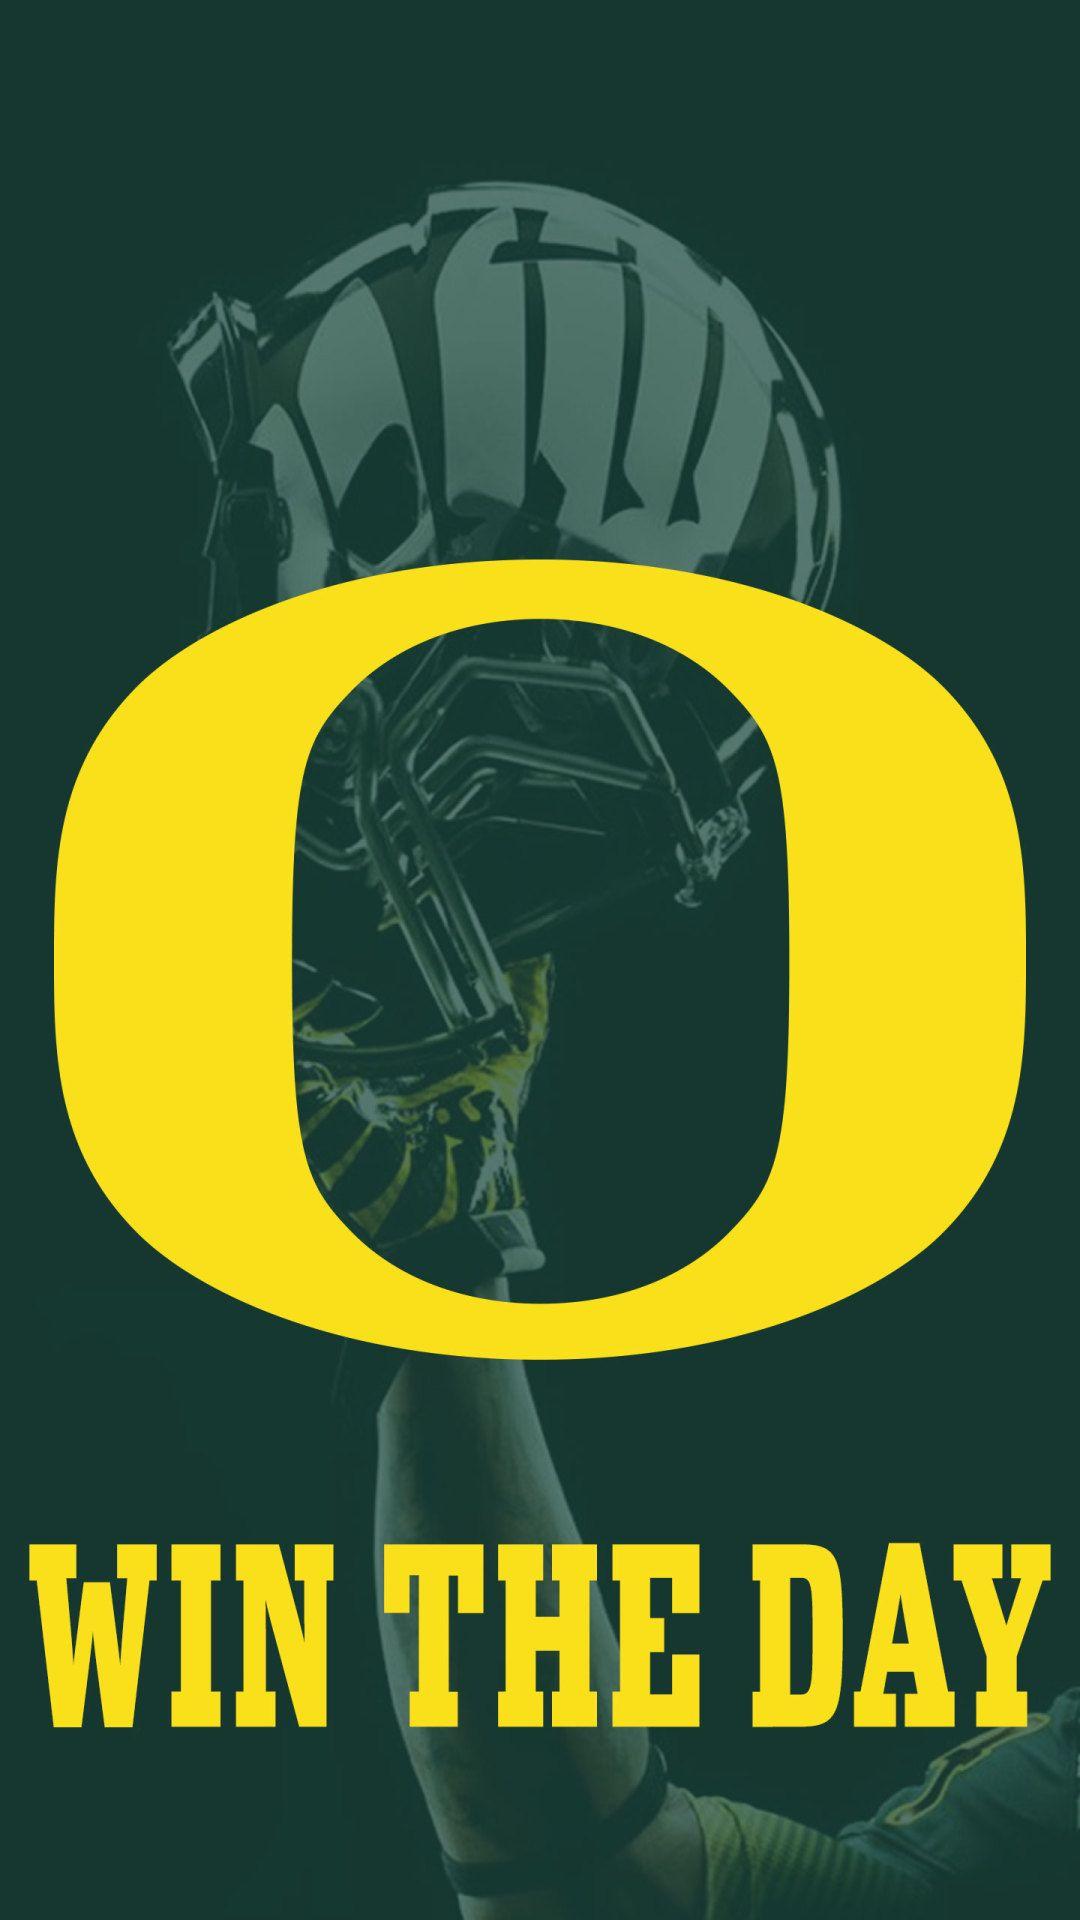 Oregon Ducks A cell phone wallpaper based on the